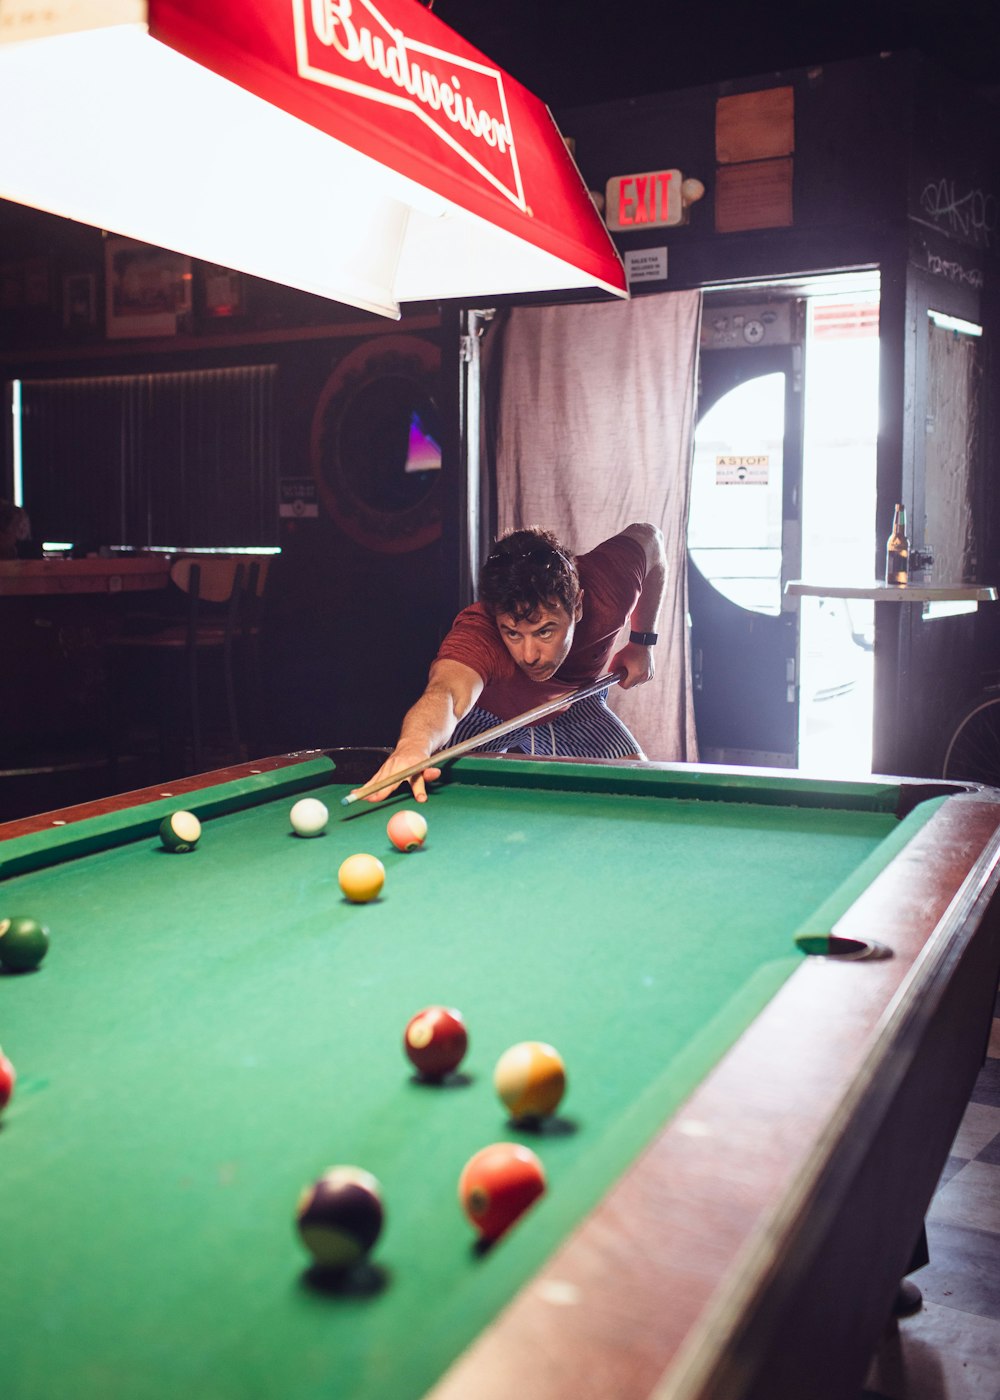 a man leaning over a pool table to hit a ball